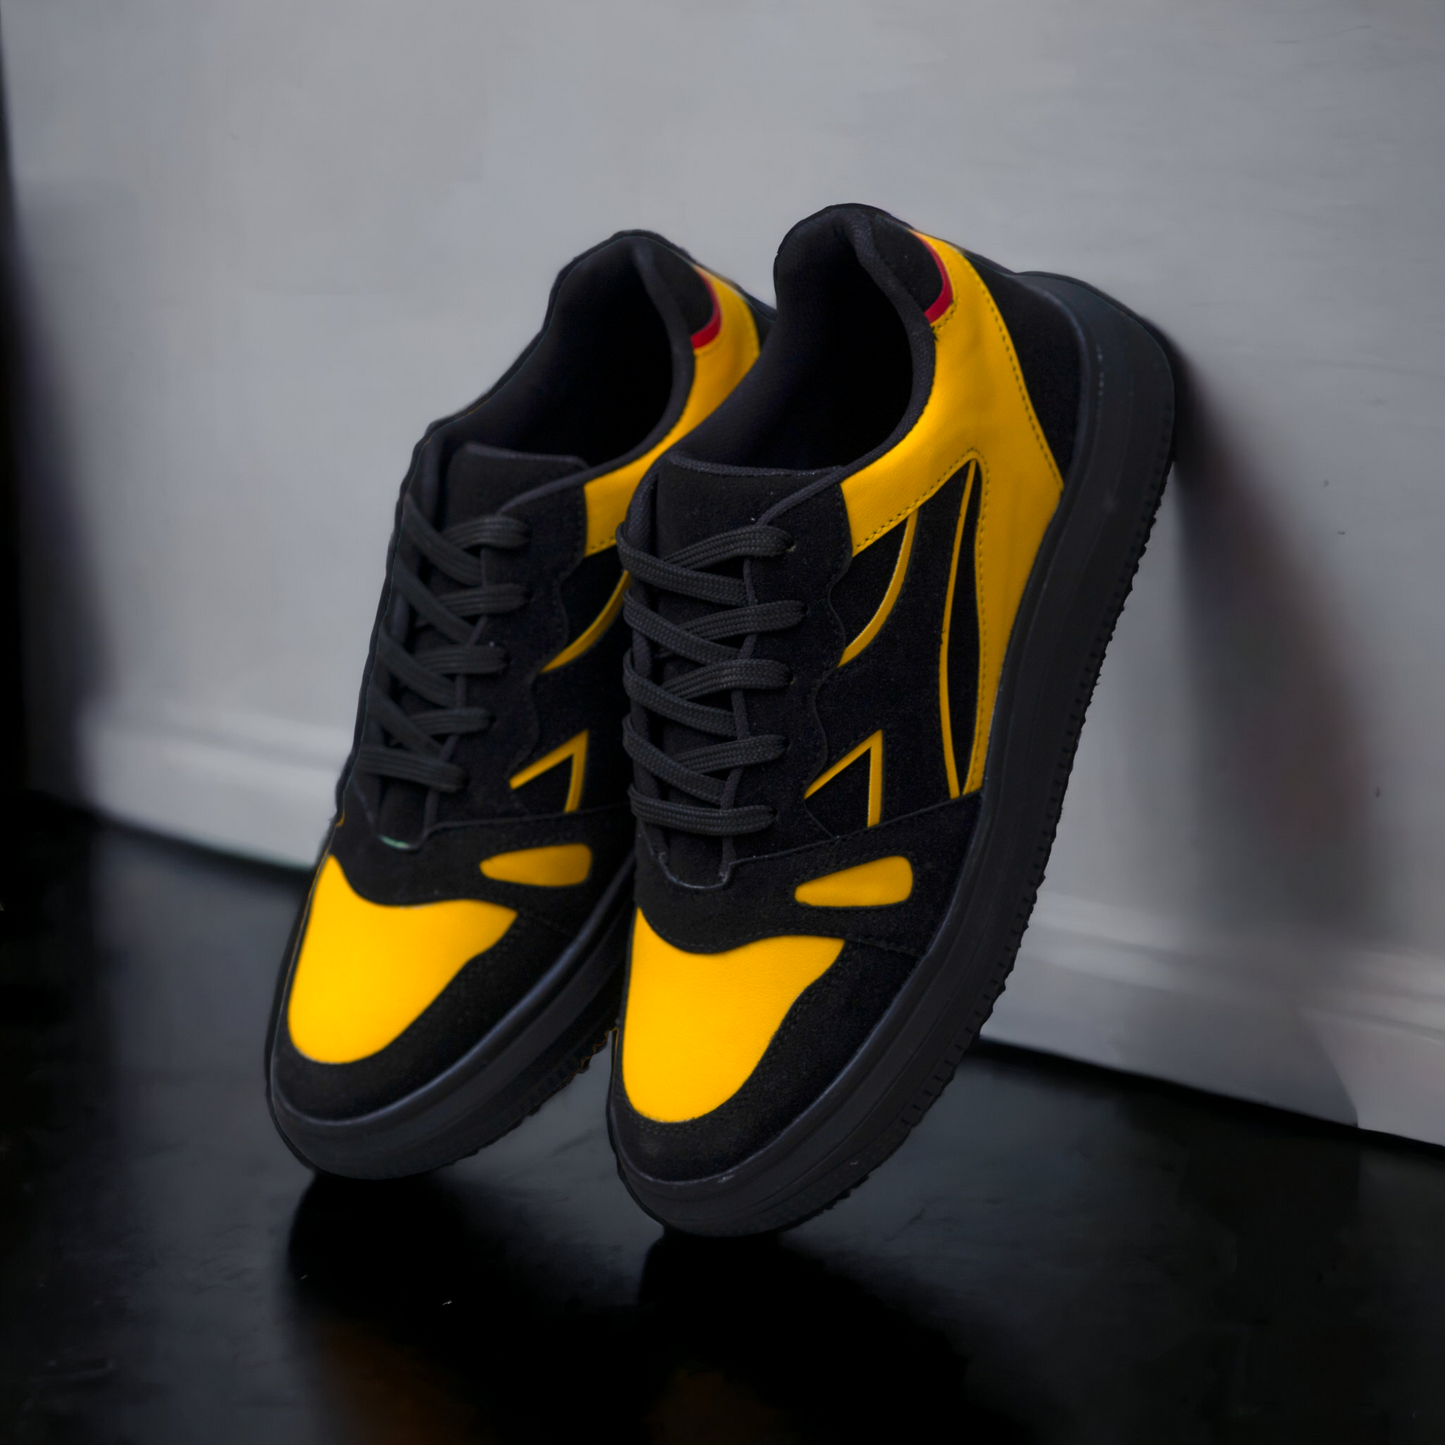 The Aurous Ignite Laceup Sneakers